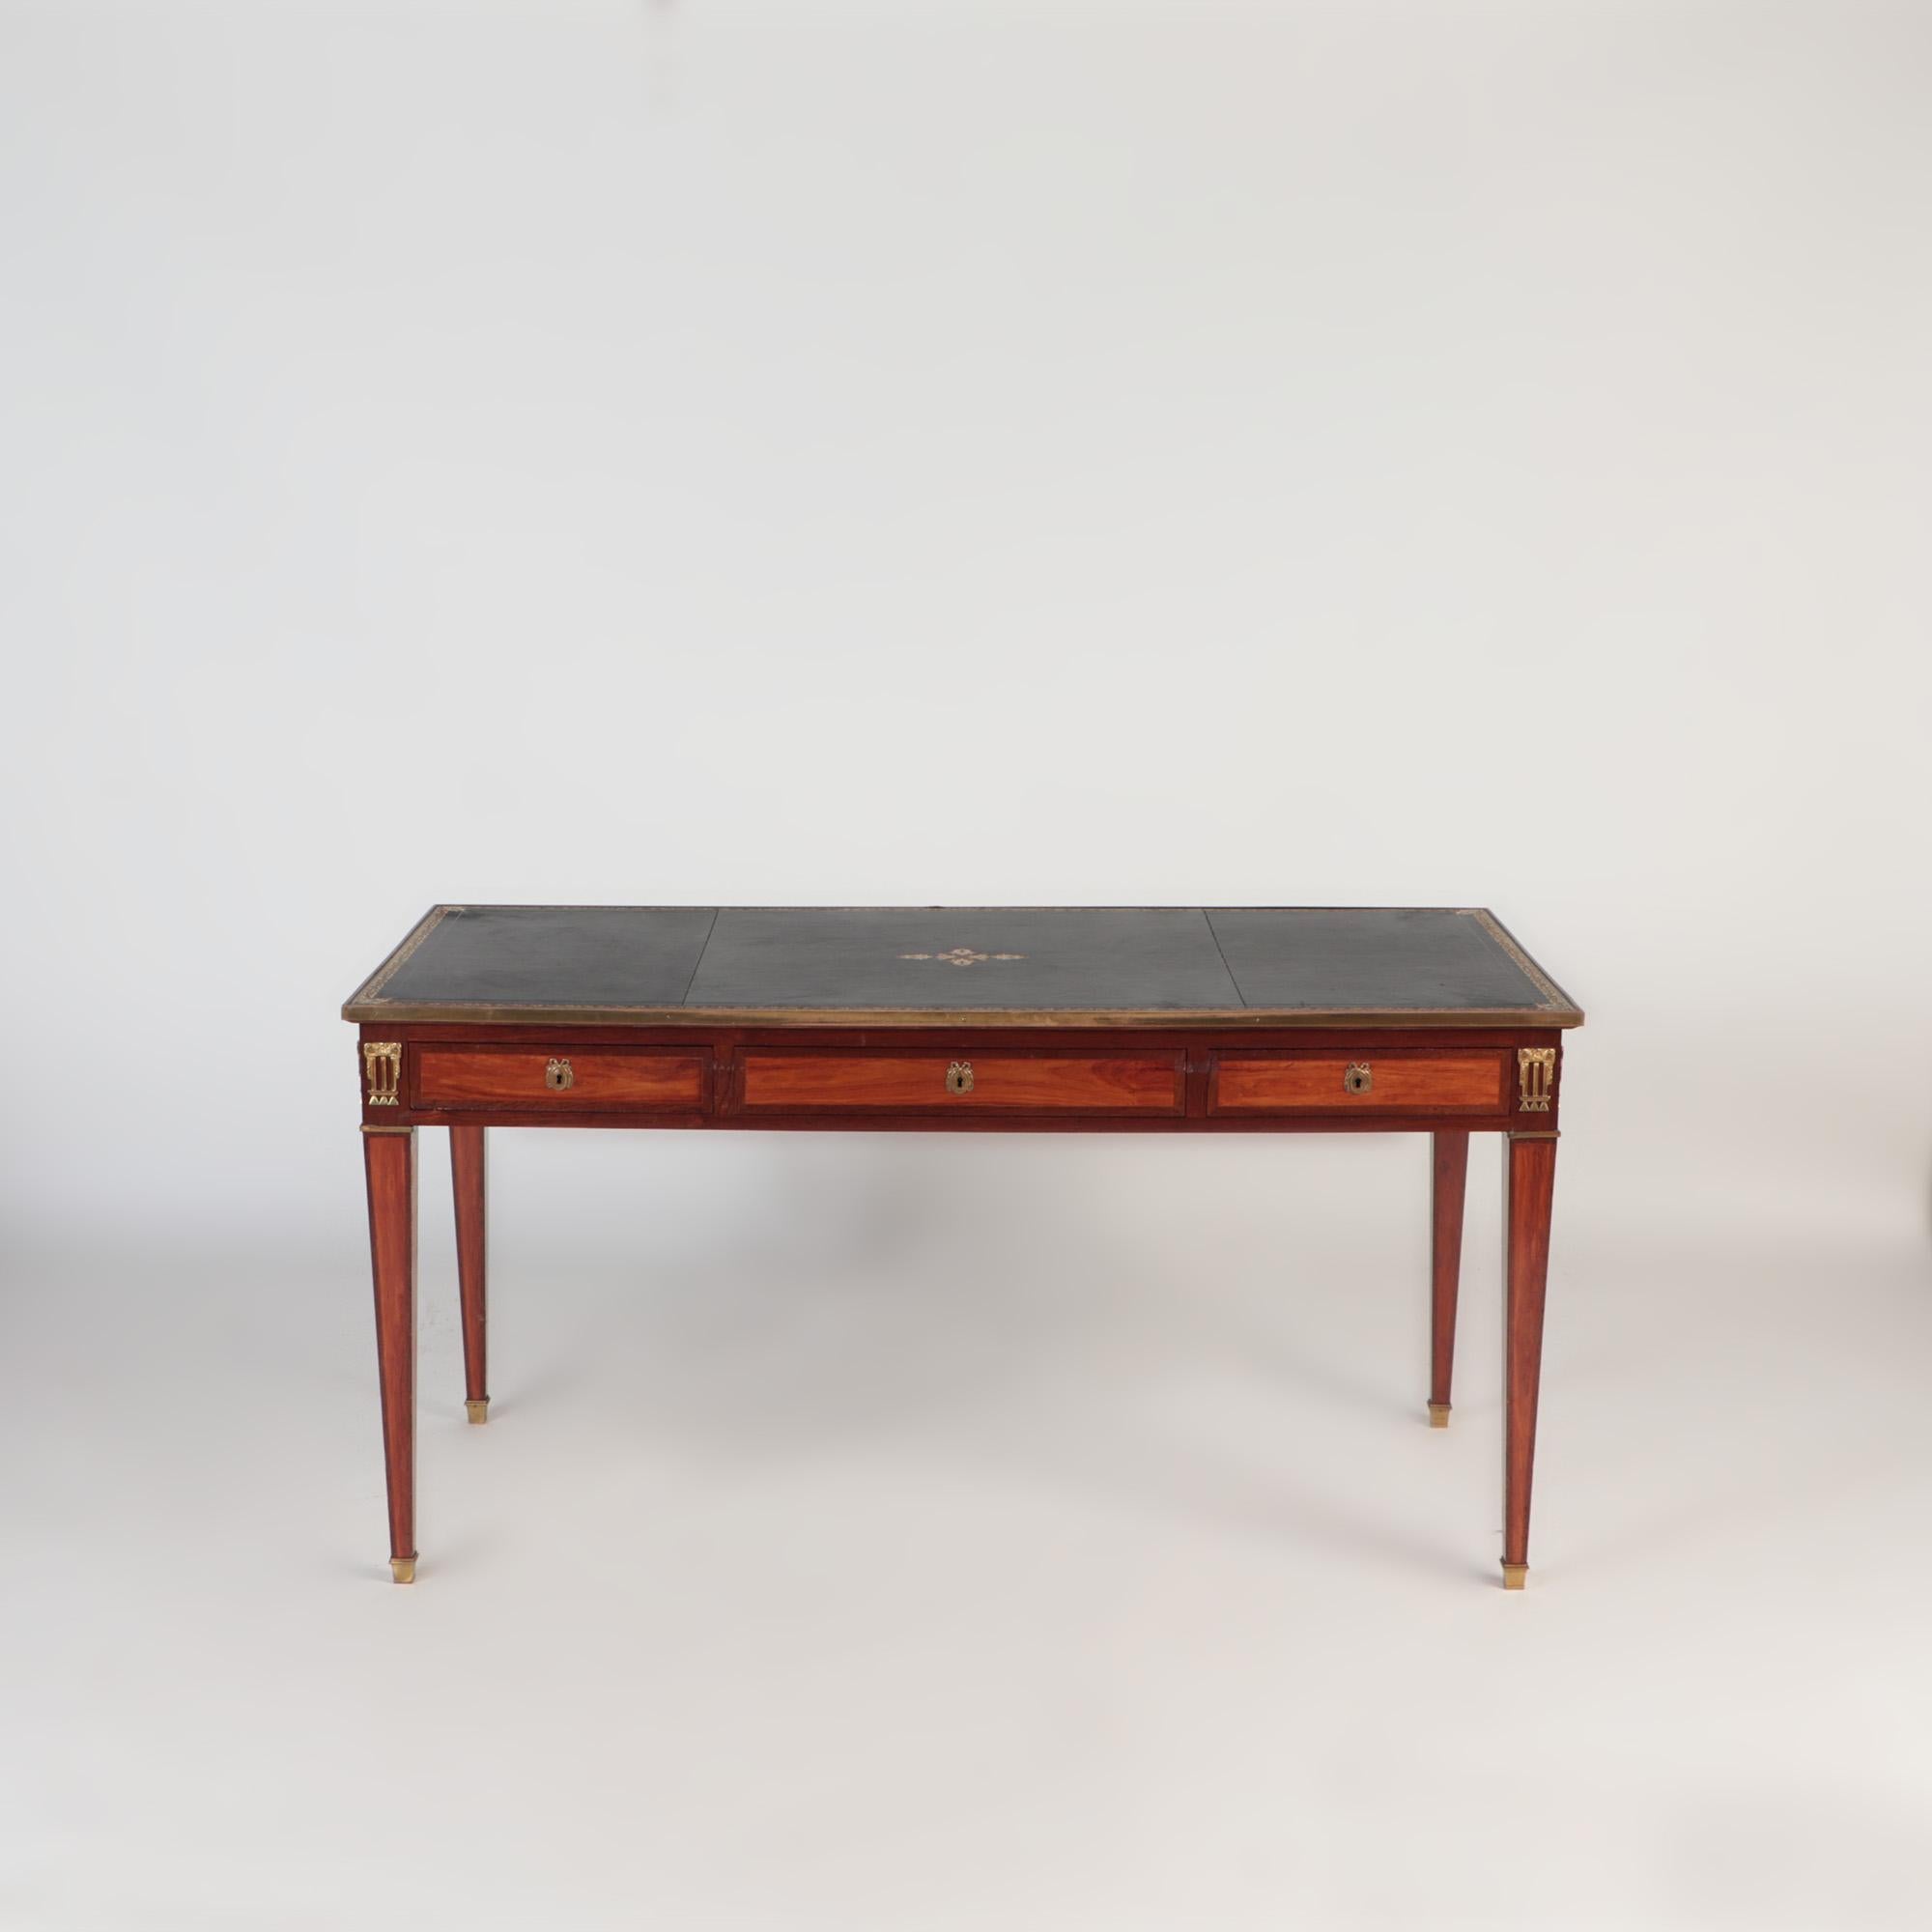 A French Louis XVI style three drawers writing desk or bureau plat. The desk has a leather top writing surface, three locking drawers with false drawer fronts on the opposite side of the table. Square tapering legs ending in brass sabots.19th C